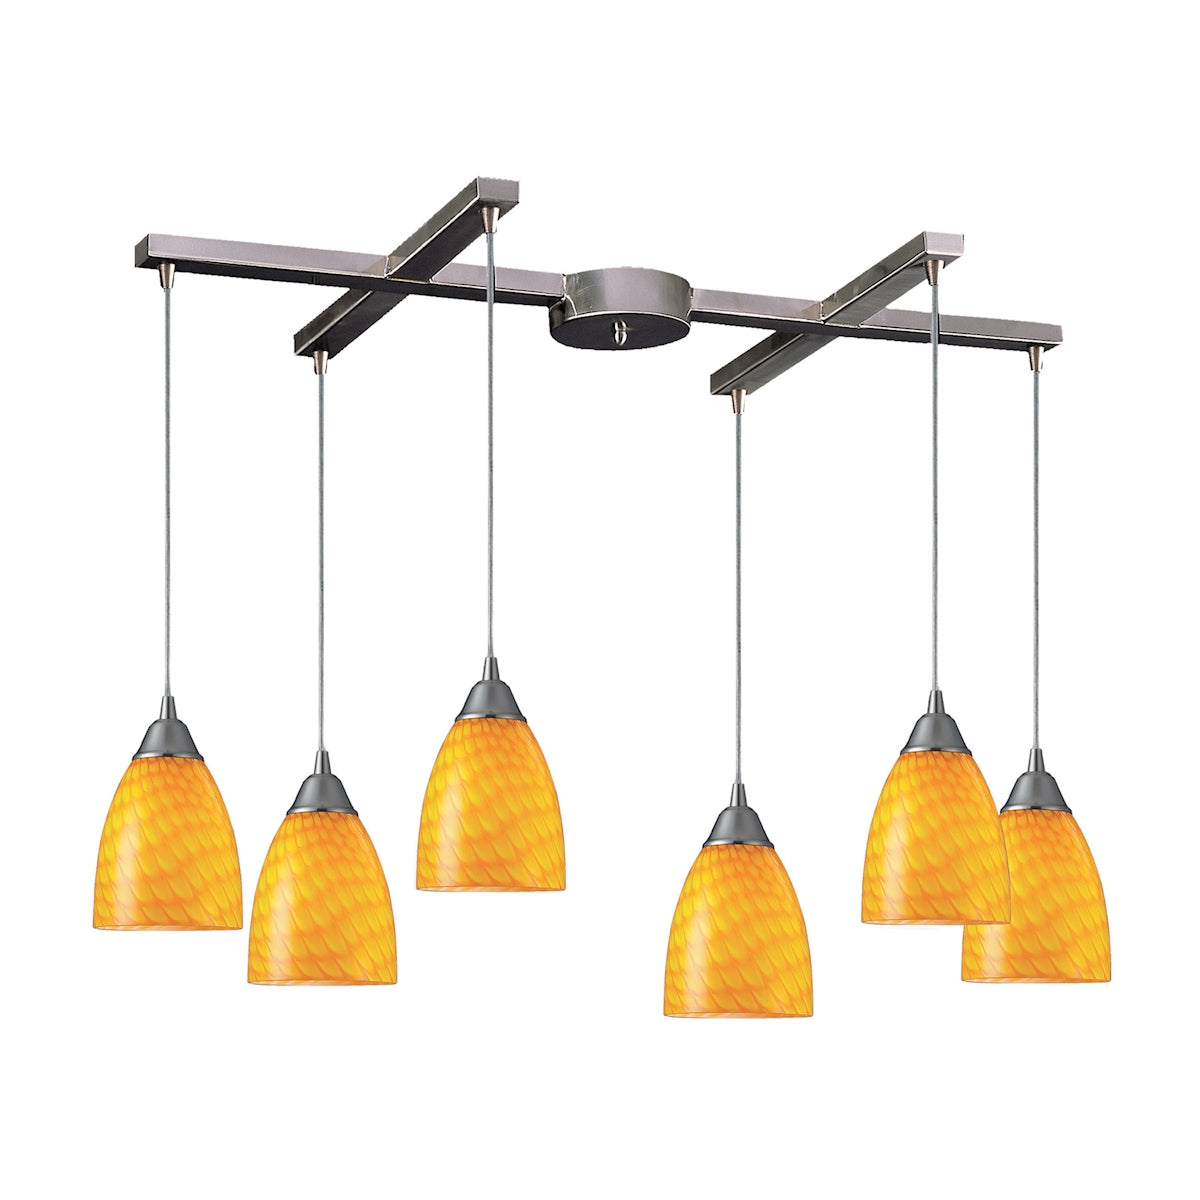 ELK Lighting 416-6CN Arco Baleno 6-Light H-Bar Pendant Fixture in Satin Nickel with Canary Glass